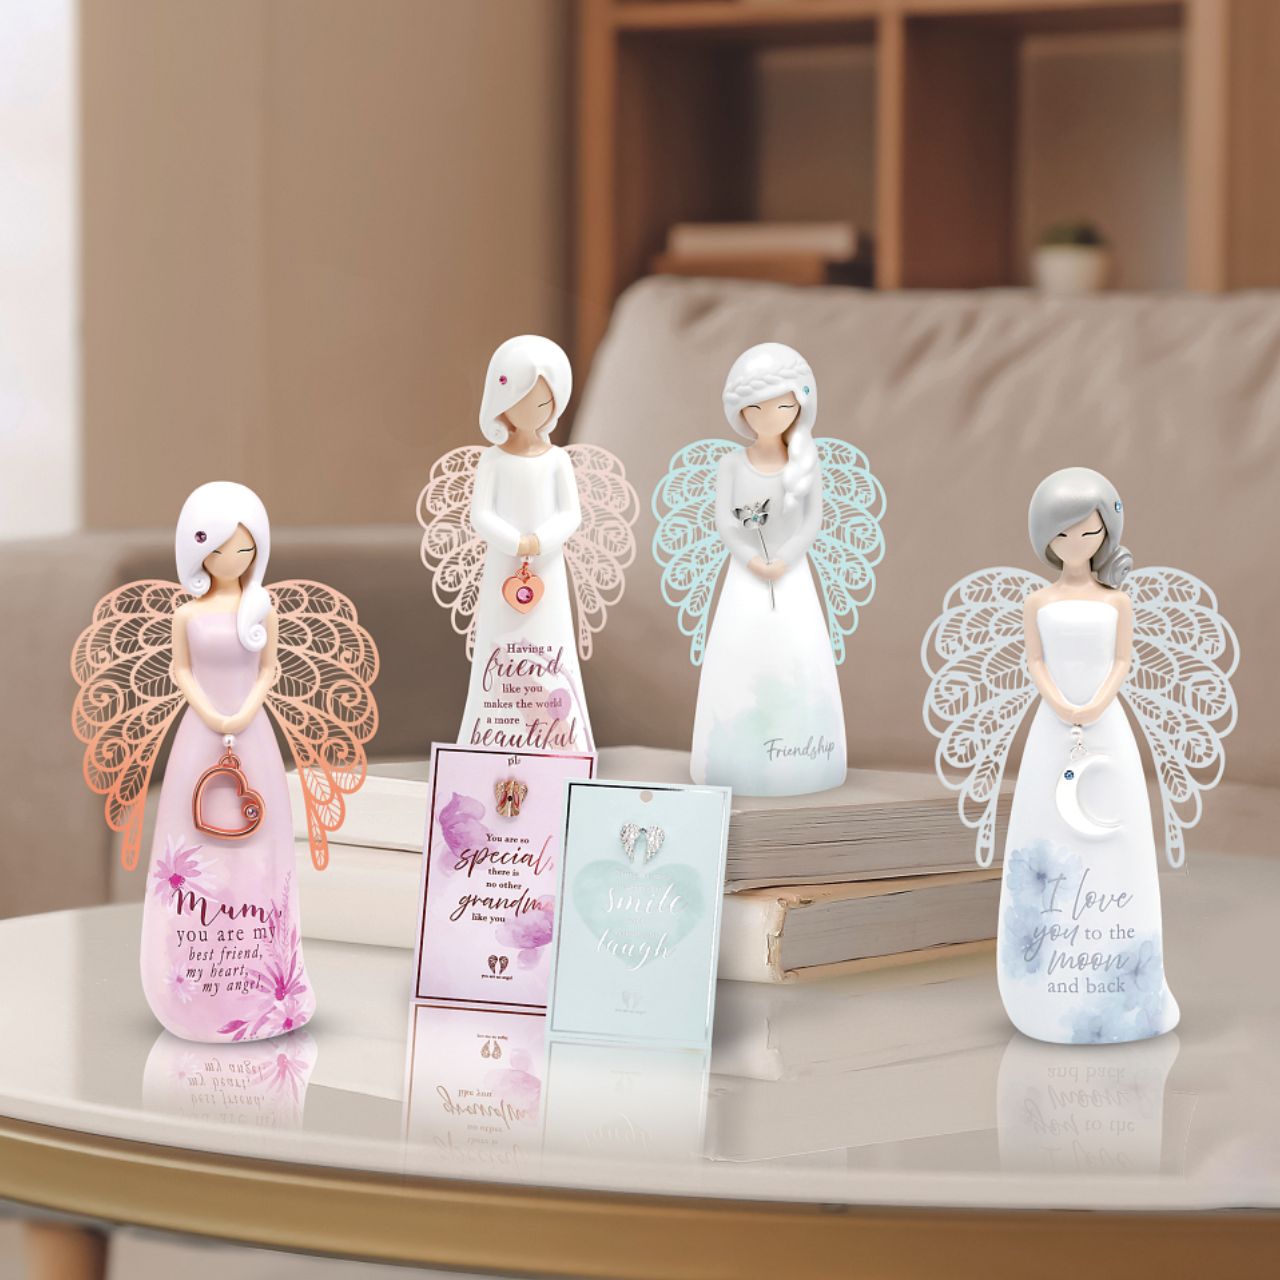 Thank You Angel Figurine - Friend Like You  "Having a friend like you makes the world a beautiful place"  Looking for a thoughtful gift that's both beautiful and meaningful? These stunning angels are the perfect way to show someone special just how much they mean to you.